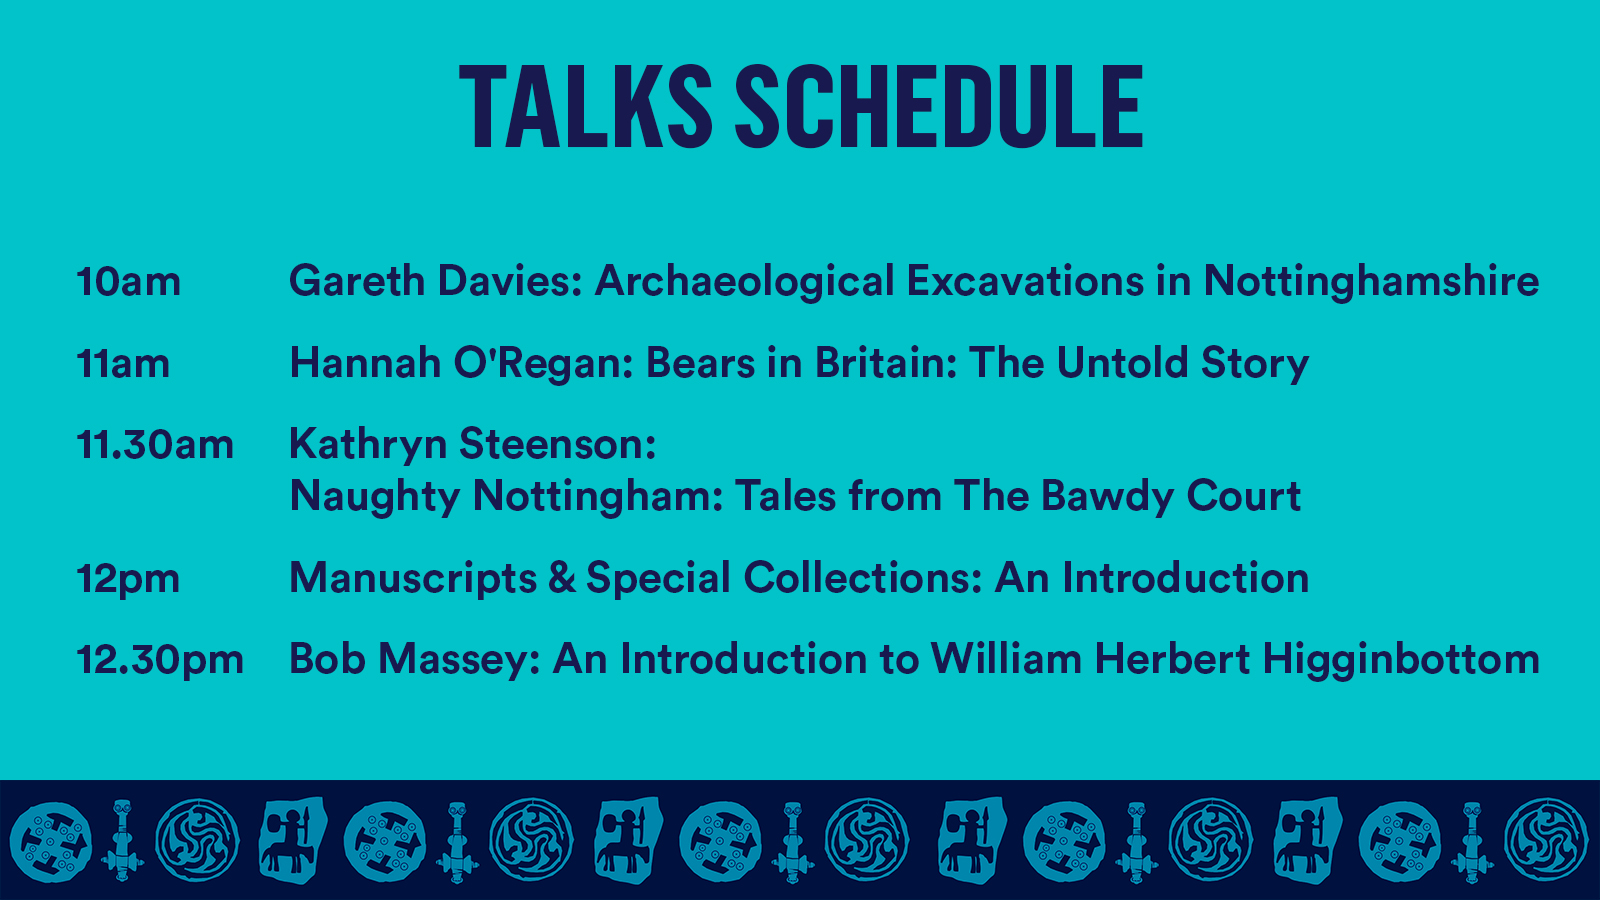 Schedule of talks outlined